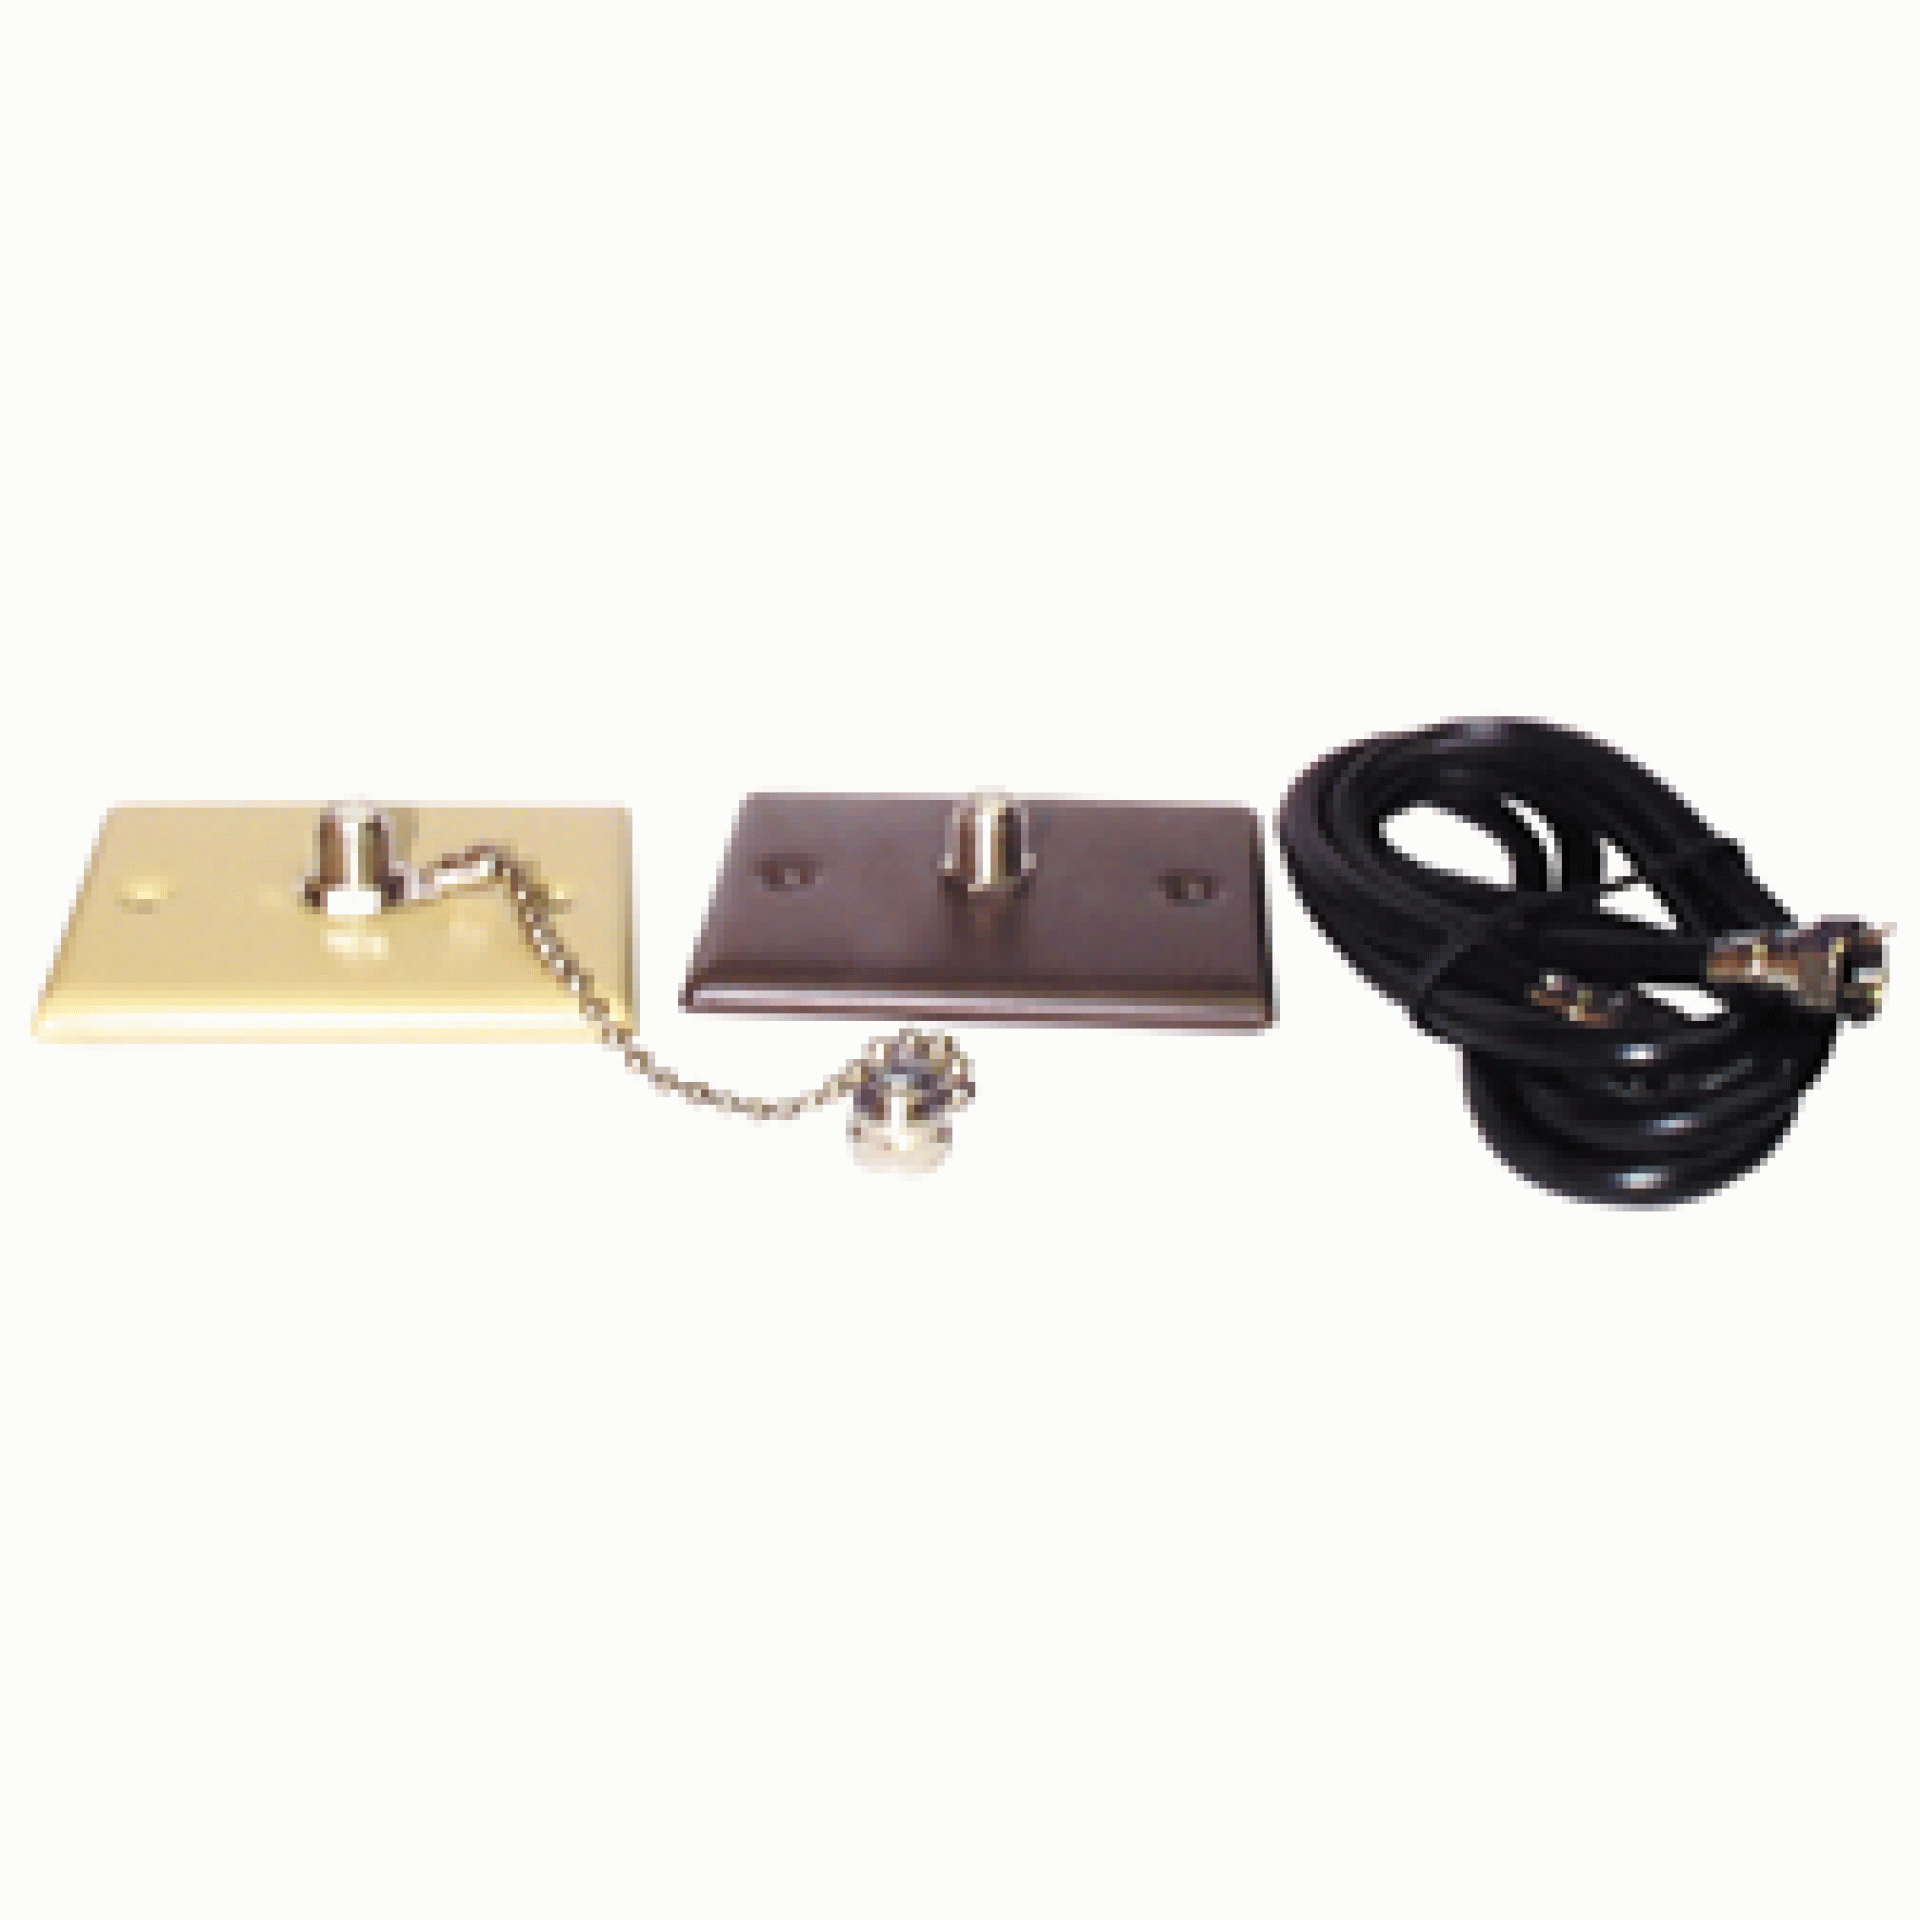 Prime Products | 08-6026 | Cable TV Lead In Kit- Beige Exterior Plate/ Walnut Interior